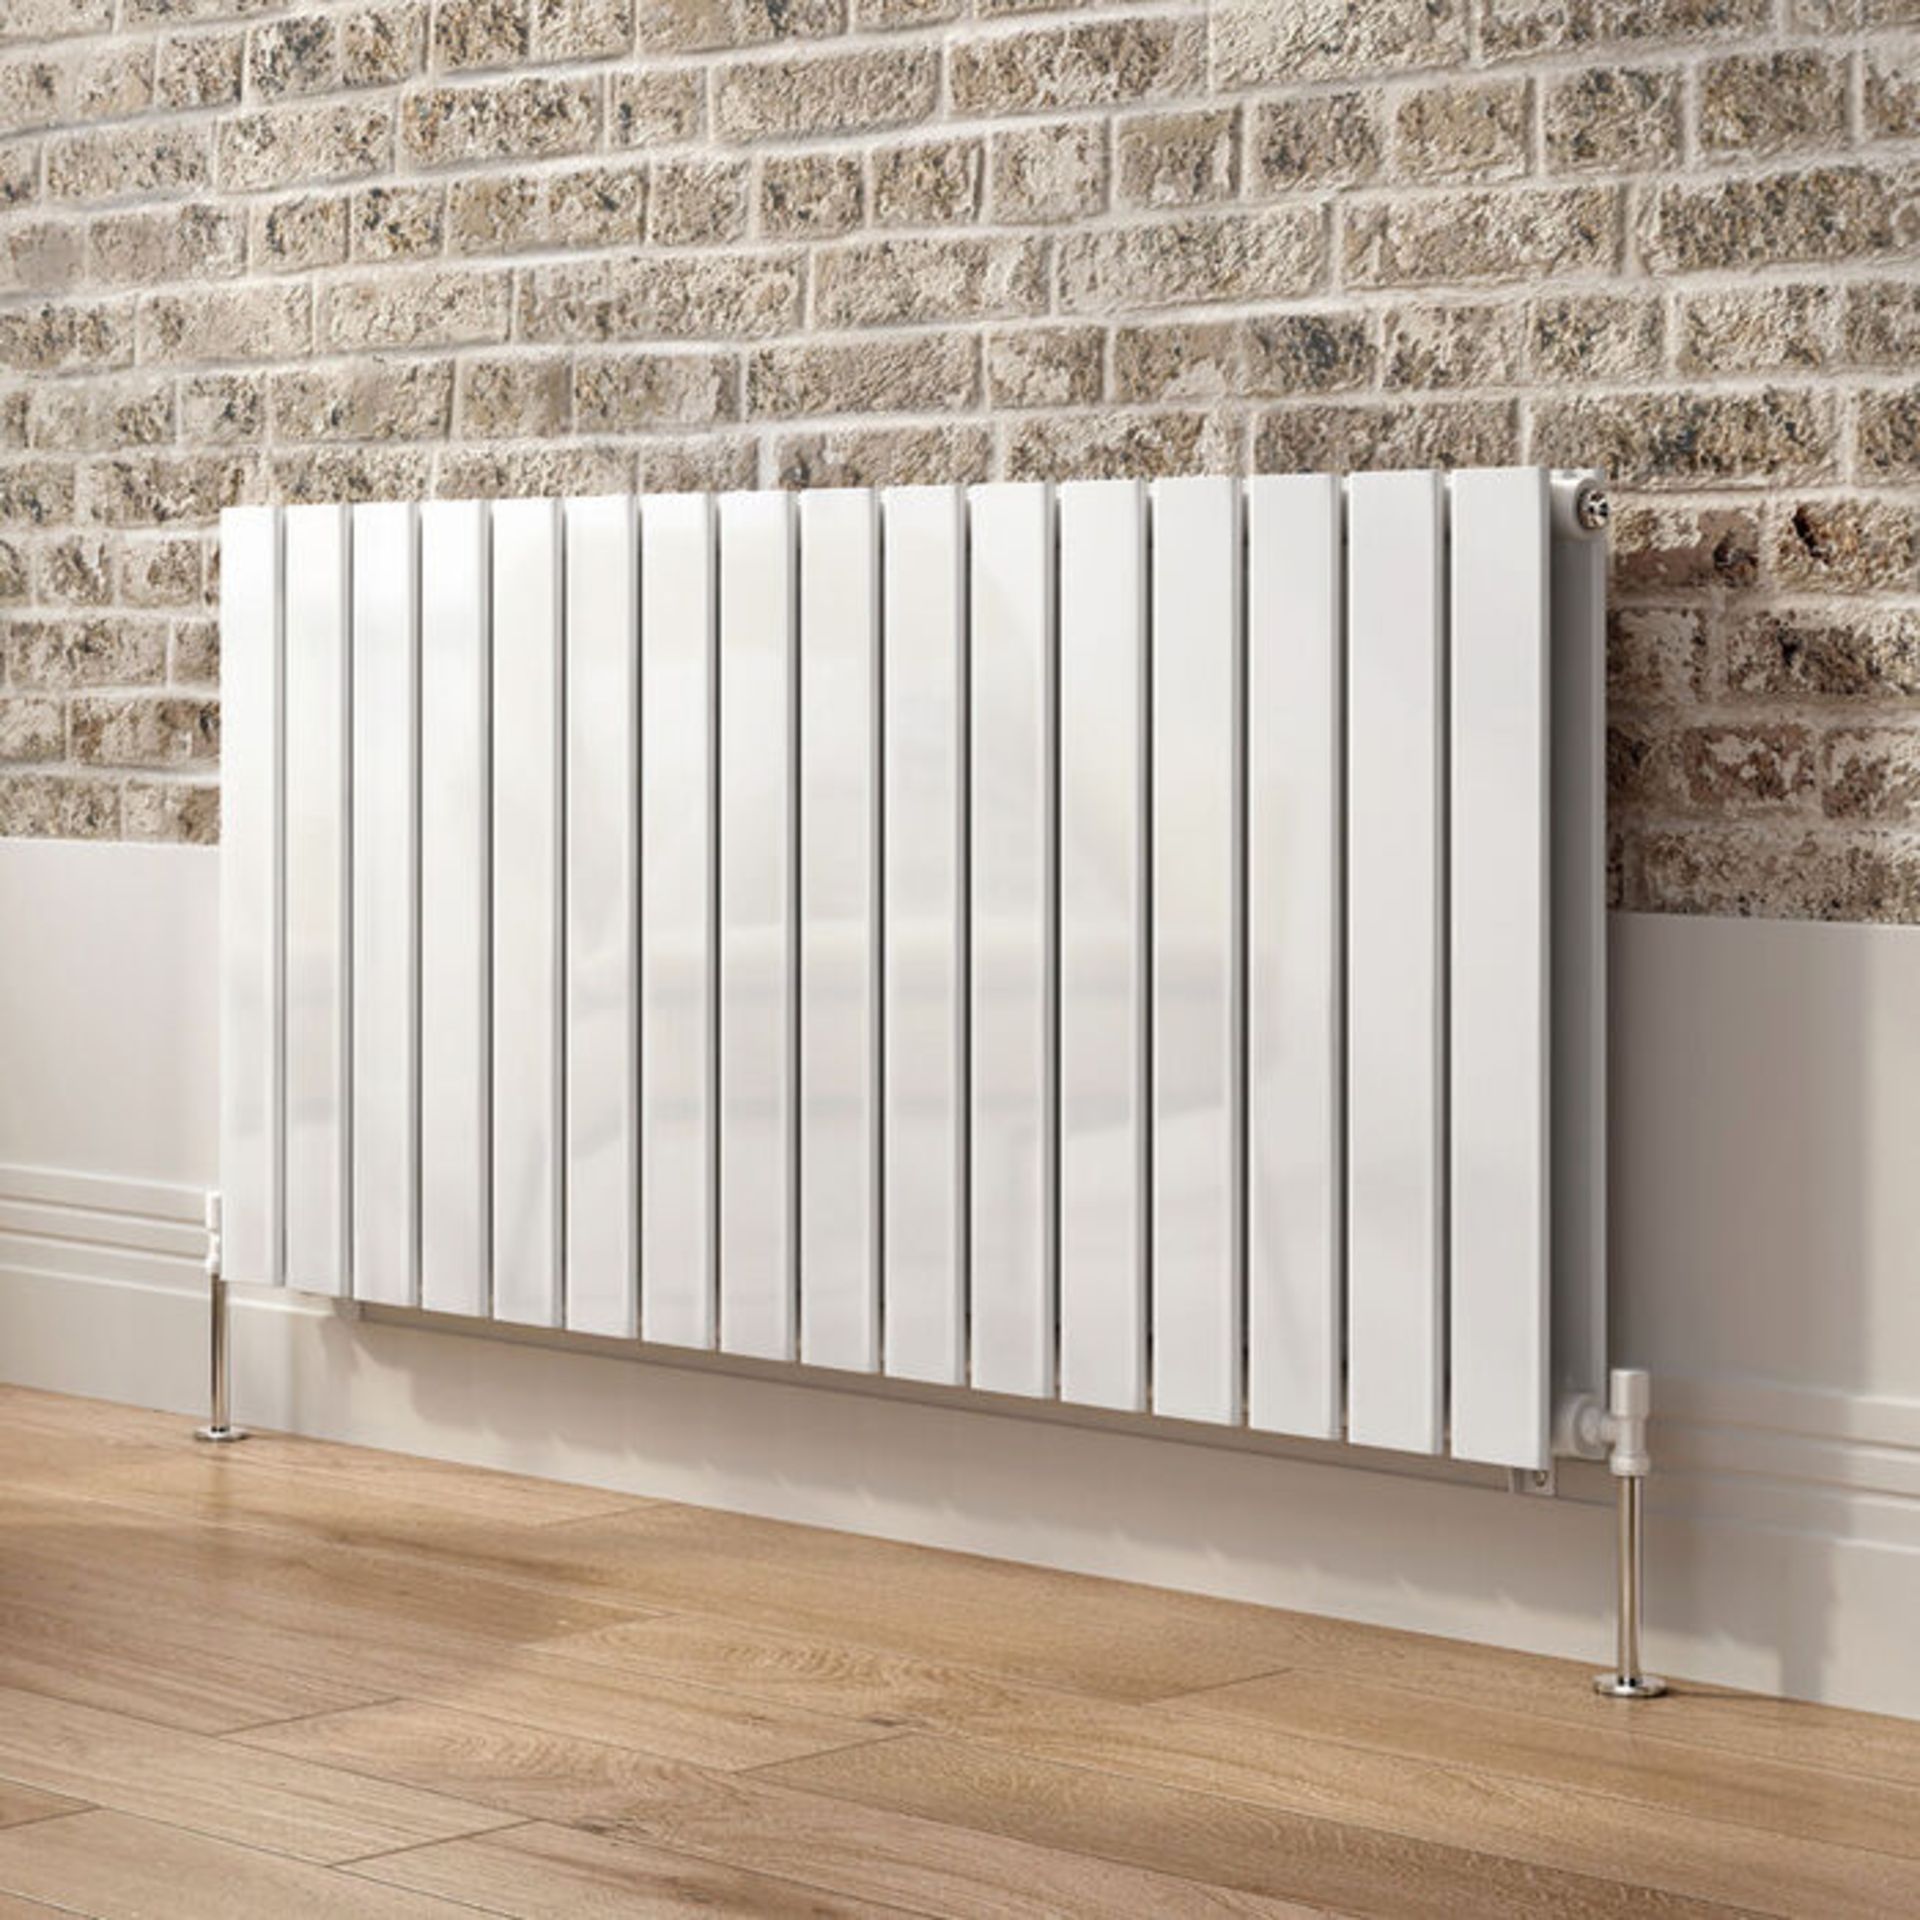 (TT16) 600x1210mm Gloss White Double Flat Panel Horizontal Radiator. RRP £499.99. Made with ... - Image 4 of 5